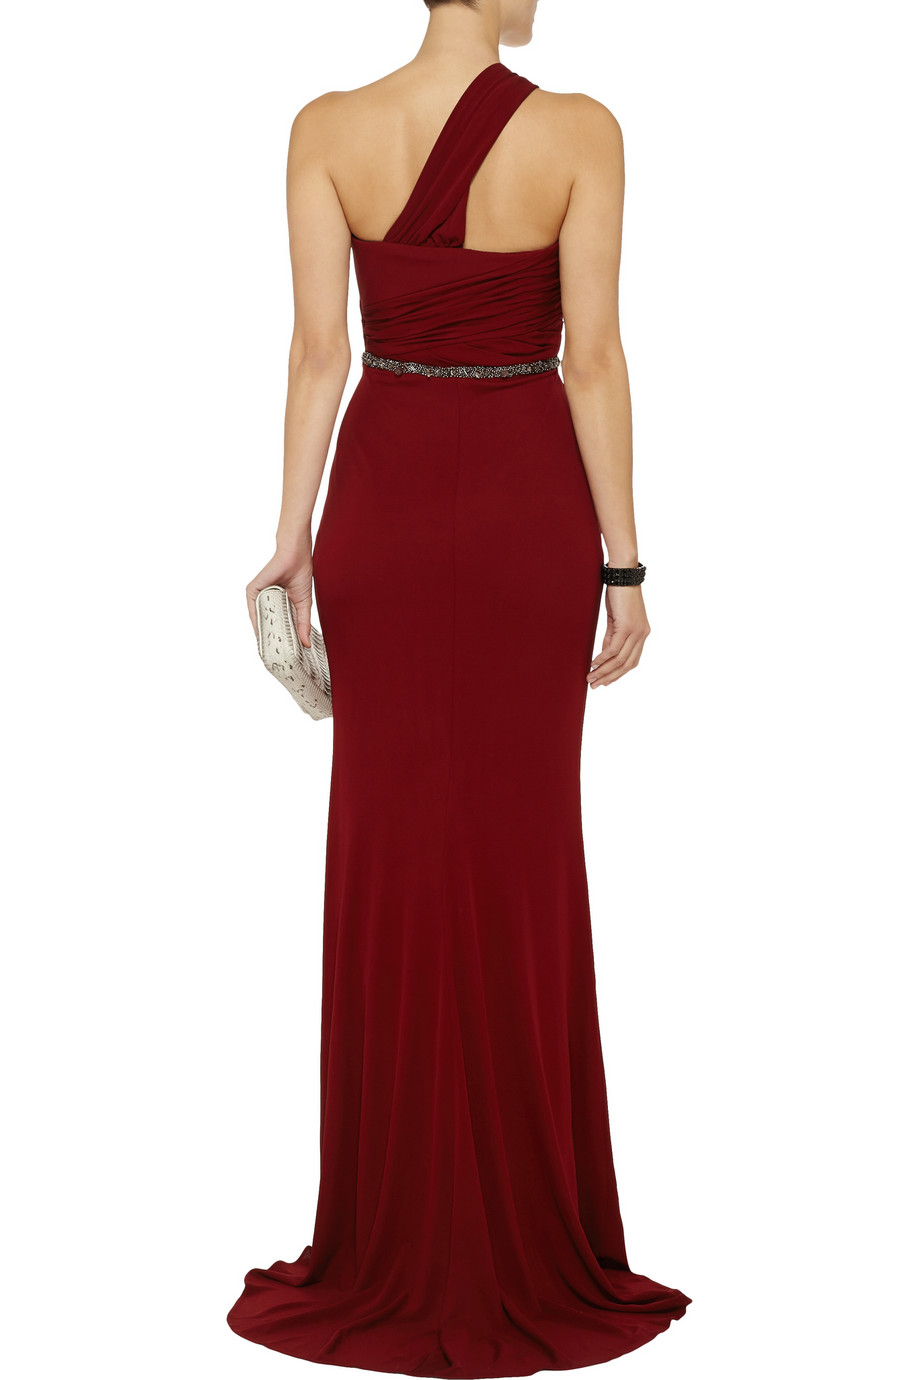 Badgley Mischka Embellished Jersey Gown in Red - Lyst